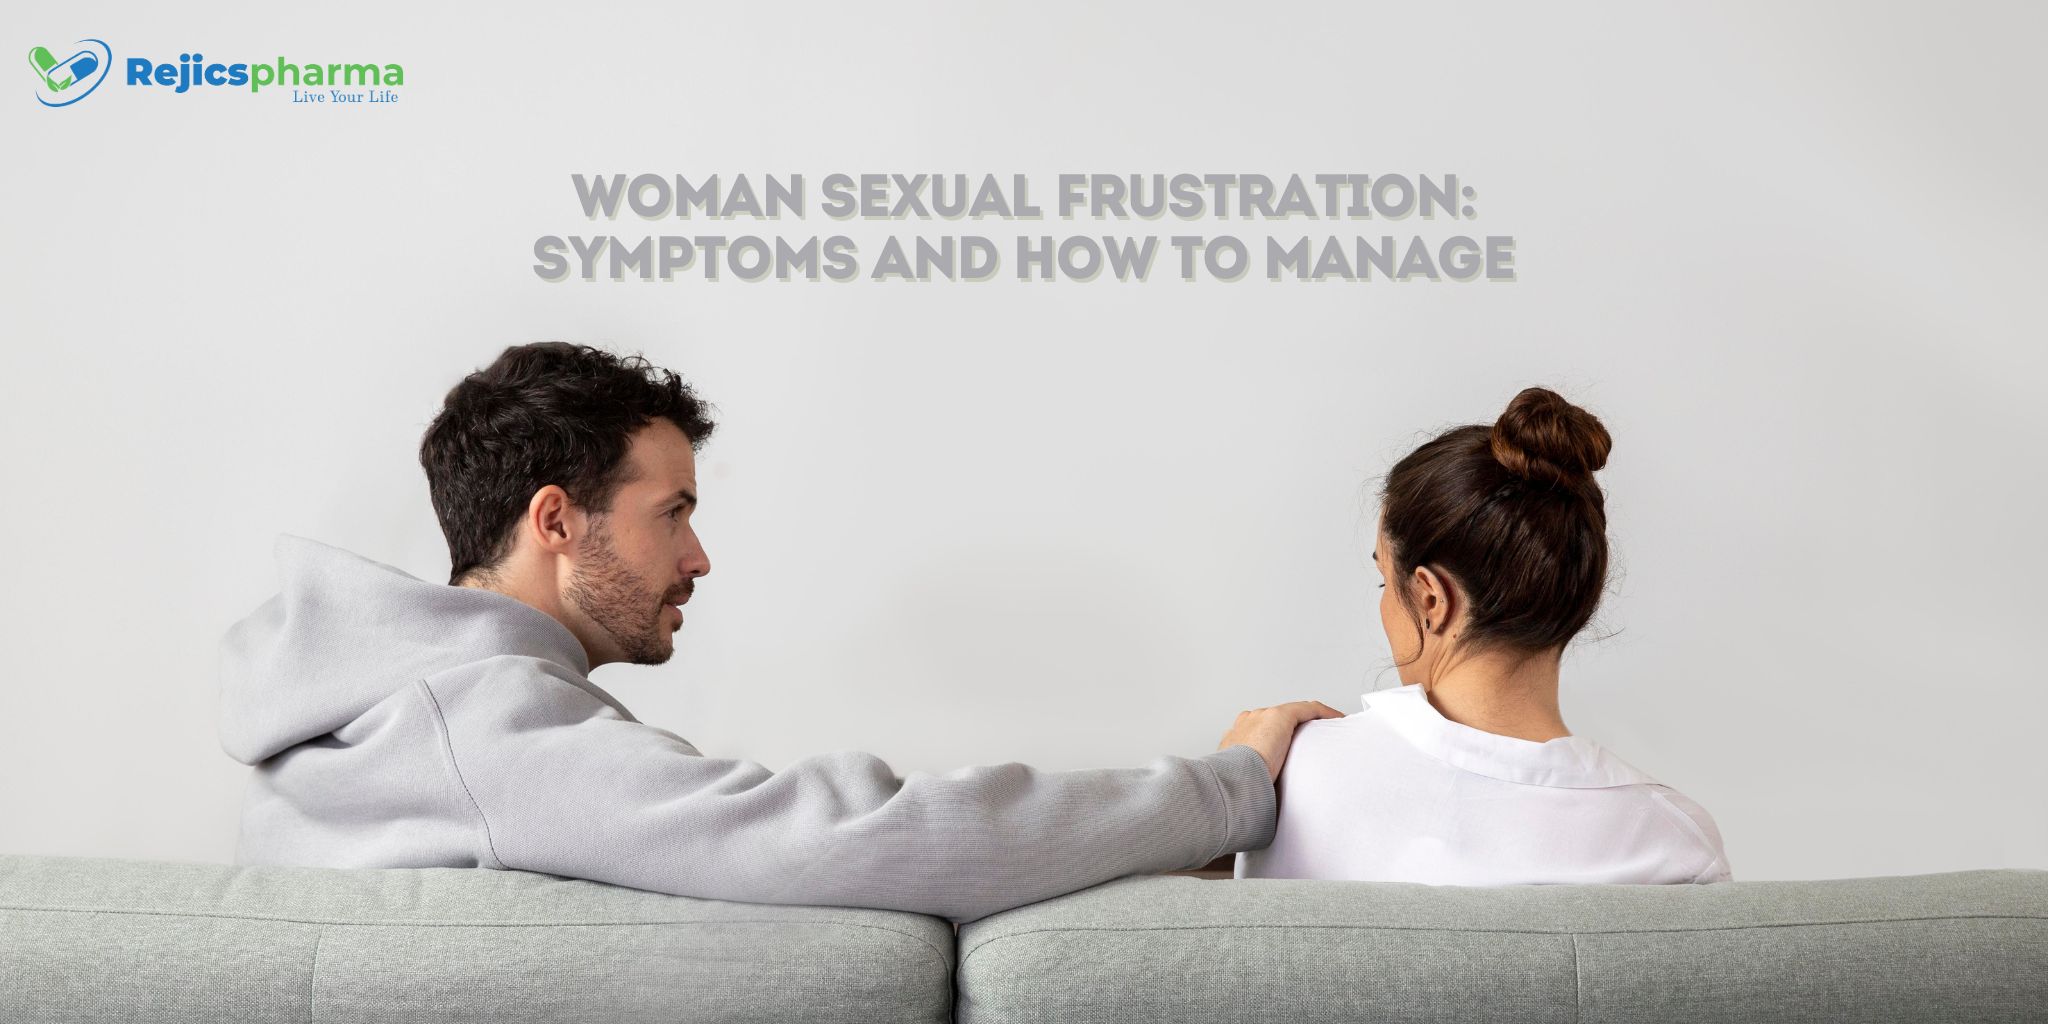 Woman sexual frustration: Symptoms and how to manage